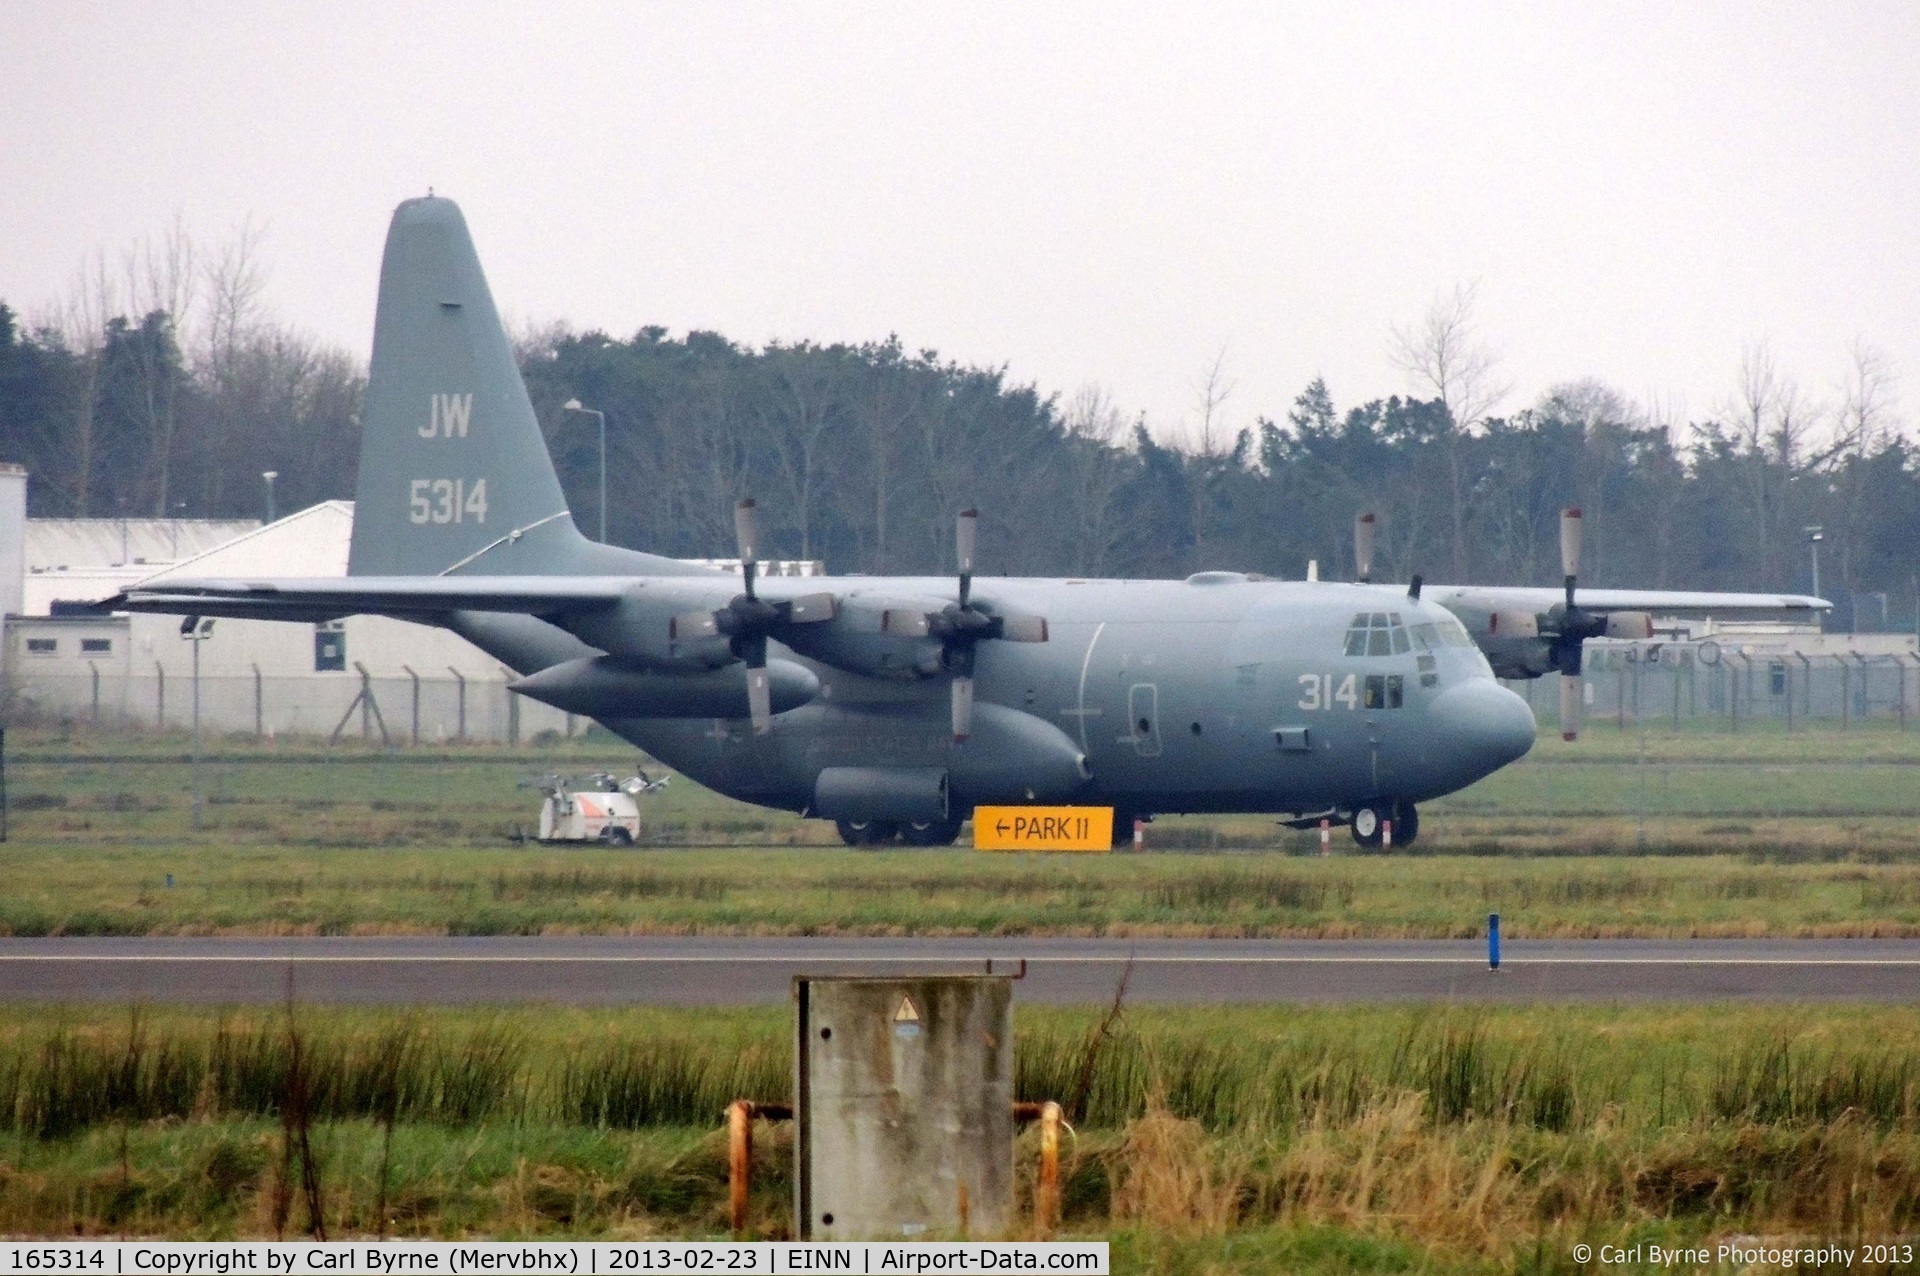 165314, 1994 Lockheed Martin C-130T Hercules C/N 382-5384, US Navy. Parked in the centre of the airfield.